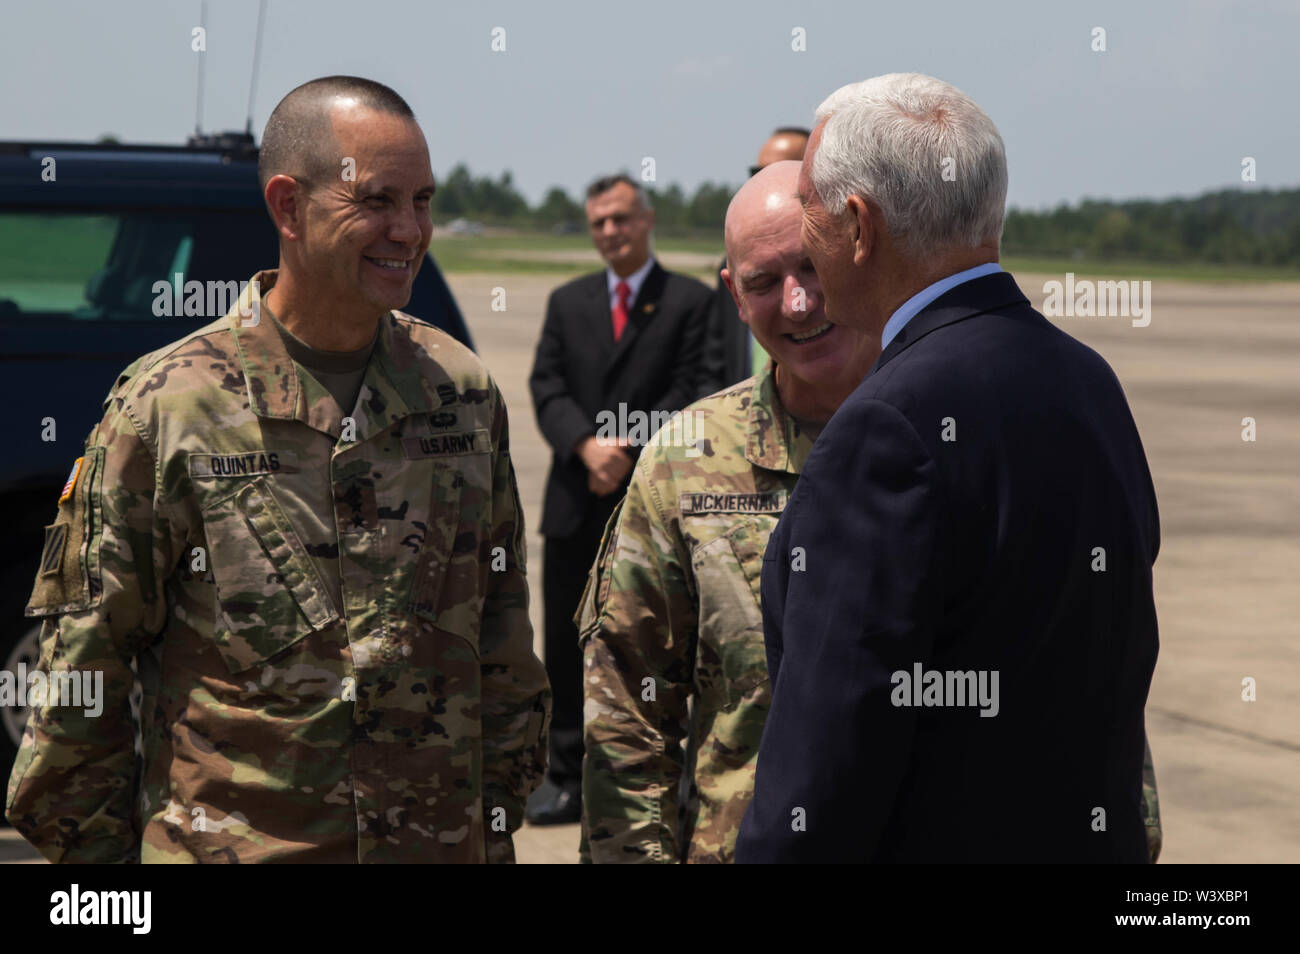 Vice President Mike Pence converses with Lieutenant General Leopoldo Quintas Jr., deputy commanding general, U.S. Army Forces Command, and Major General Brian McKiernan, deputy commanding general, XVIII Airborne Corps and Fort Bragg, at Pope Army Airfield on Fort Bragg, N.C. July 17, 2019. Pence was visiting Fort Bragg to speak at a Salute to the Troops ceremony. (U.S. Army Photo by Pfc. Joshua Cowden / 22nd Mobile Public Affairs Detachment) Stock Photo